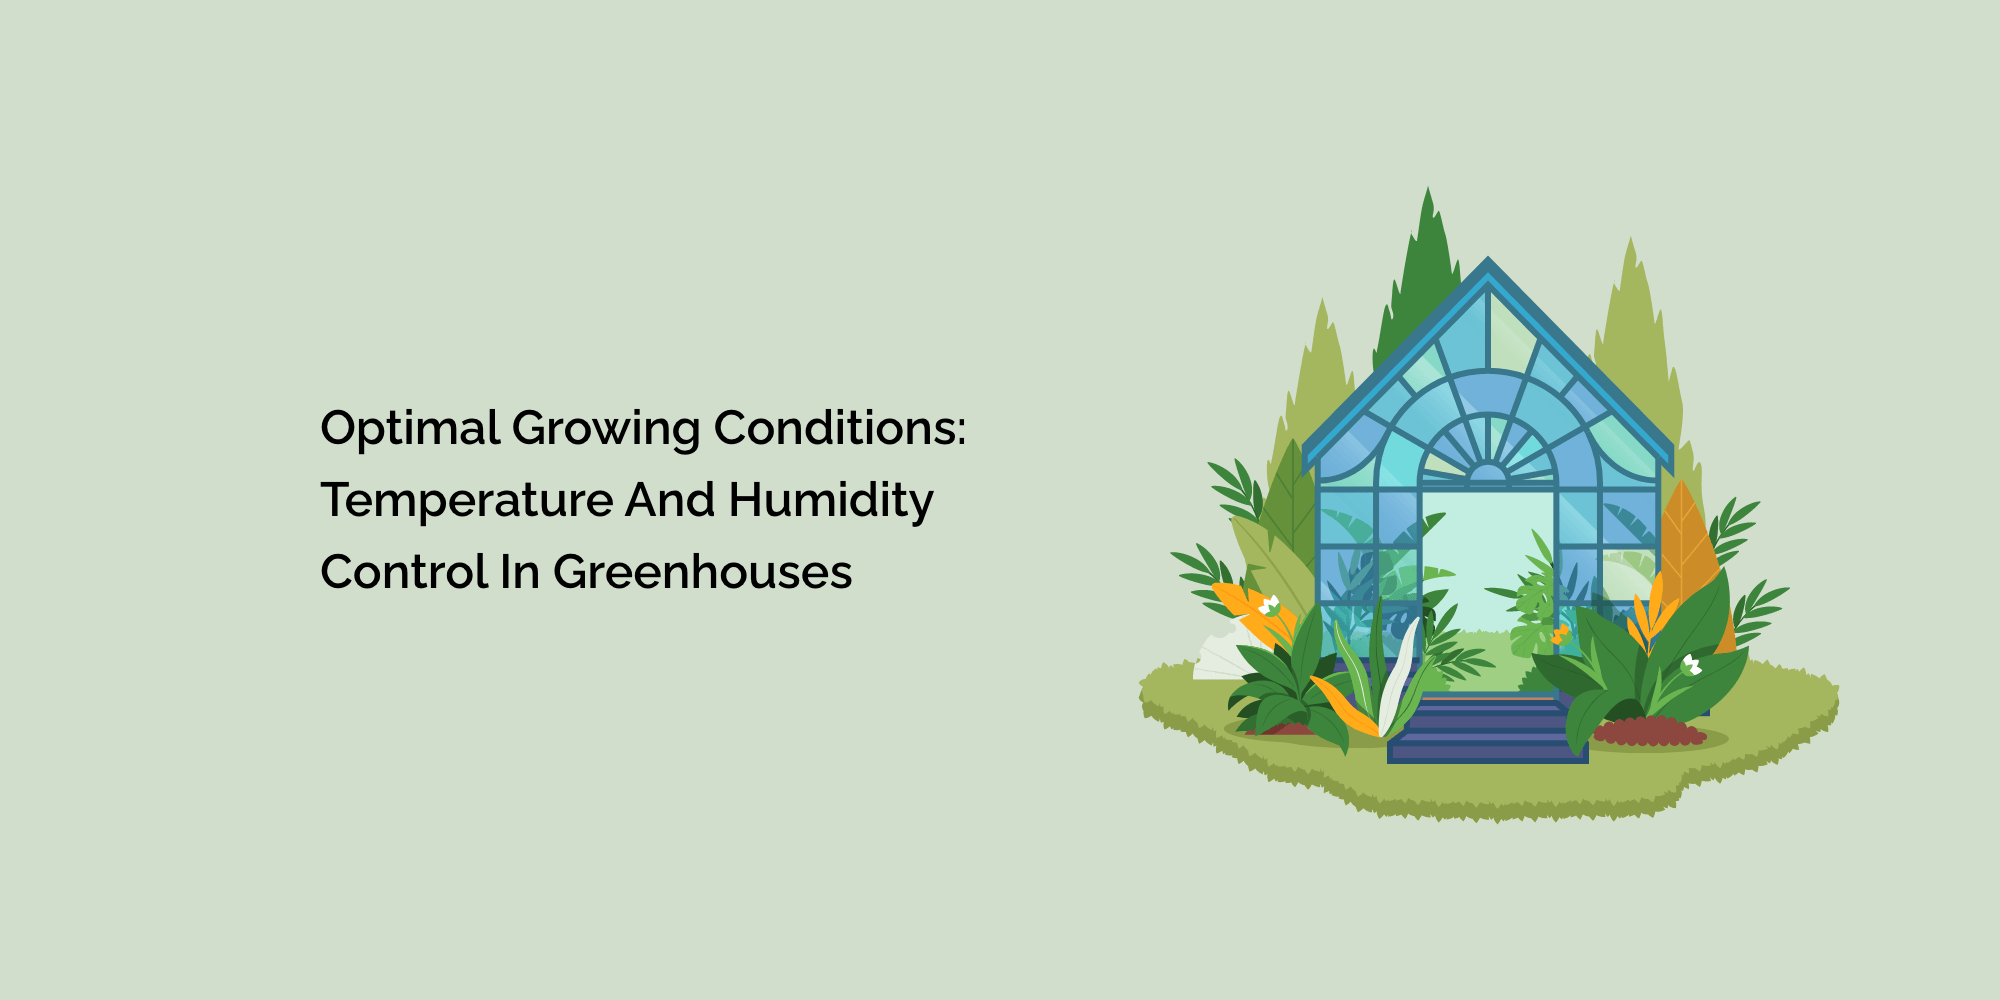 Optimal Growing Conditions: Temperature and Humidity Control in Greenhouses